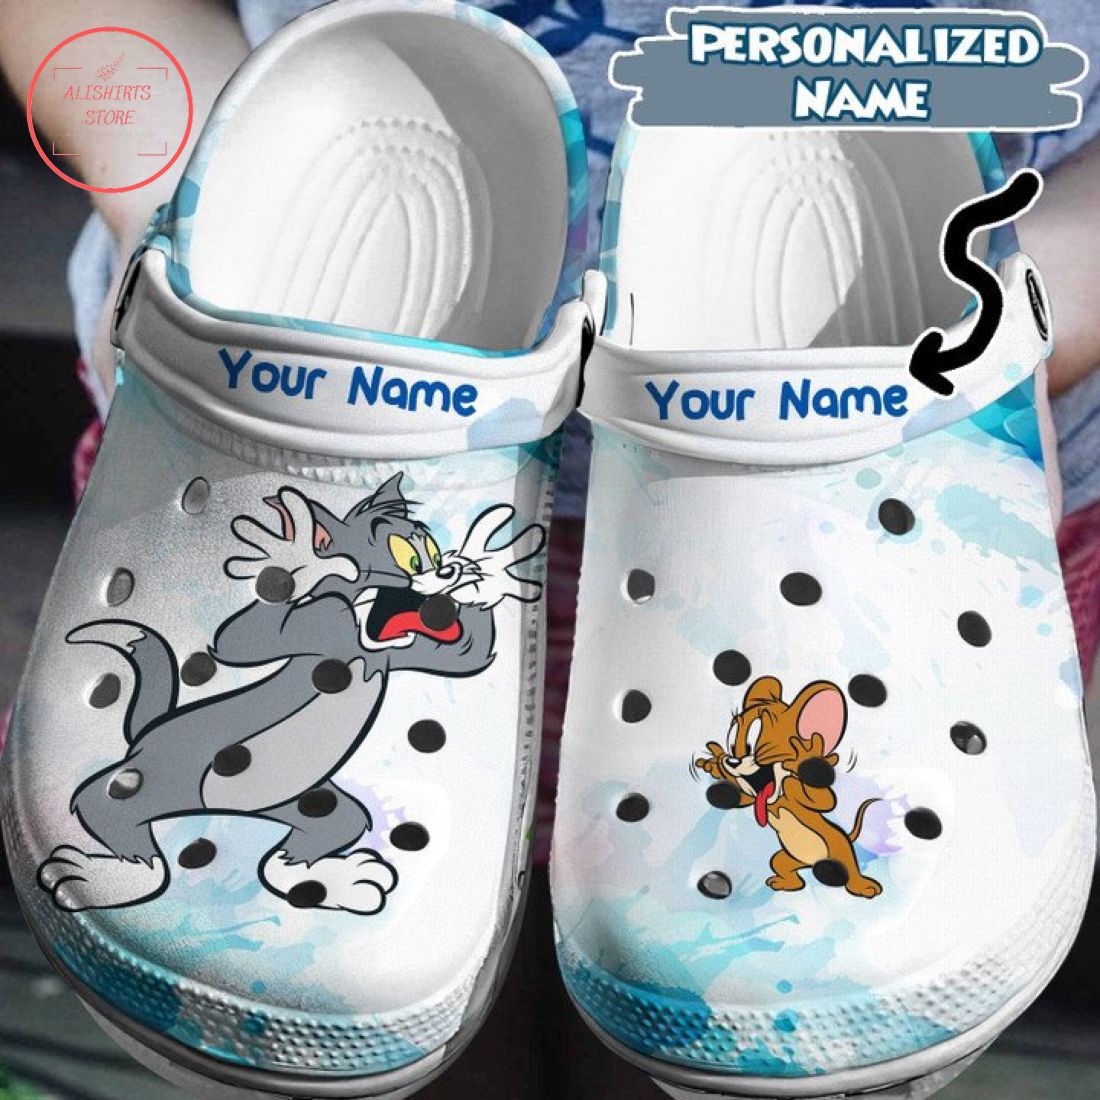 Personalized Tom and Jerry Crocs Crocband Clog